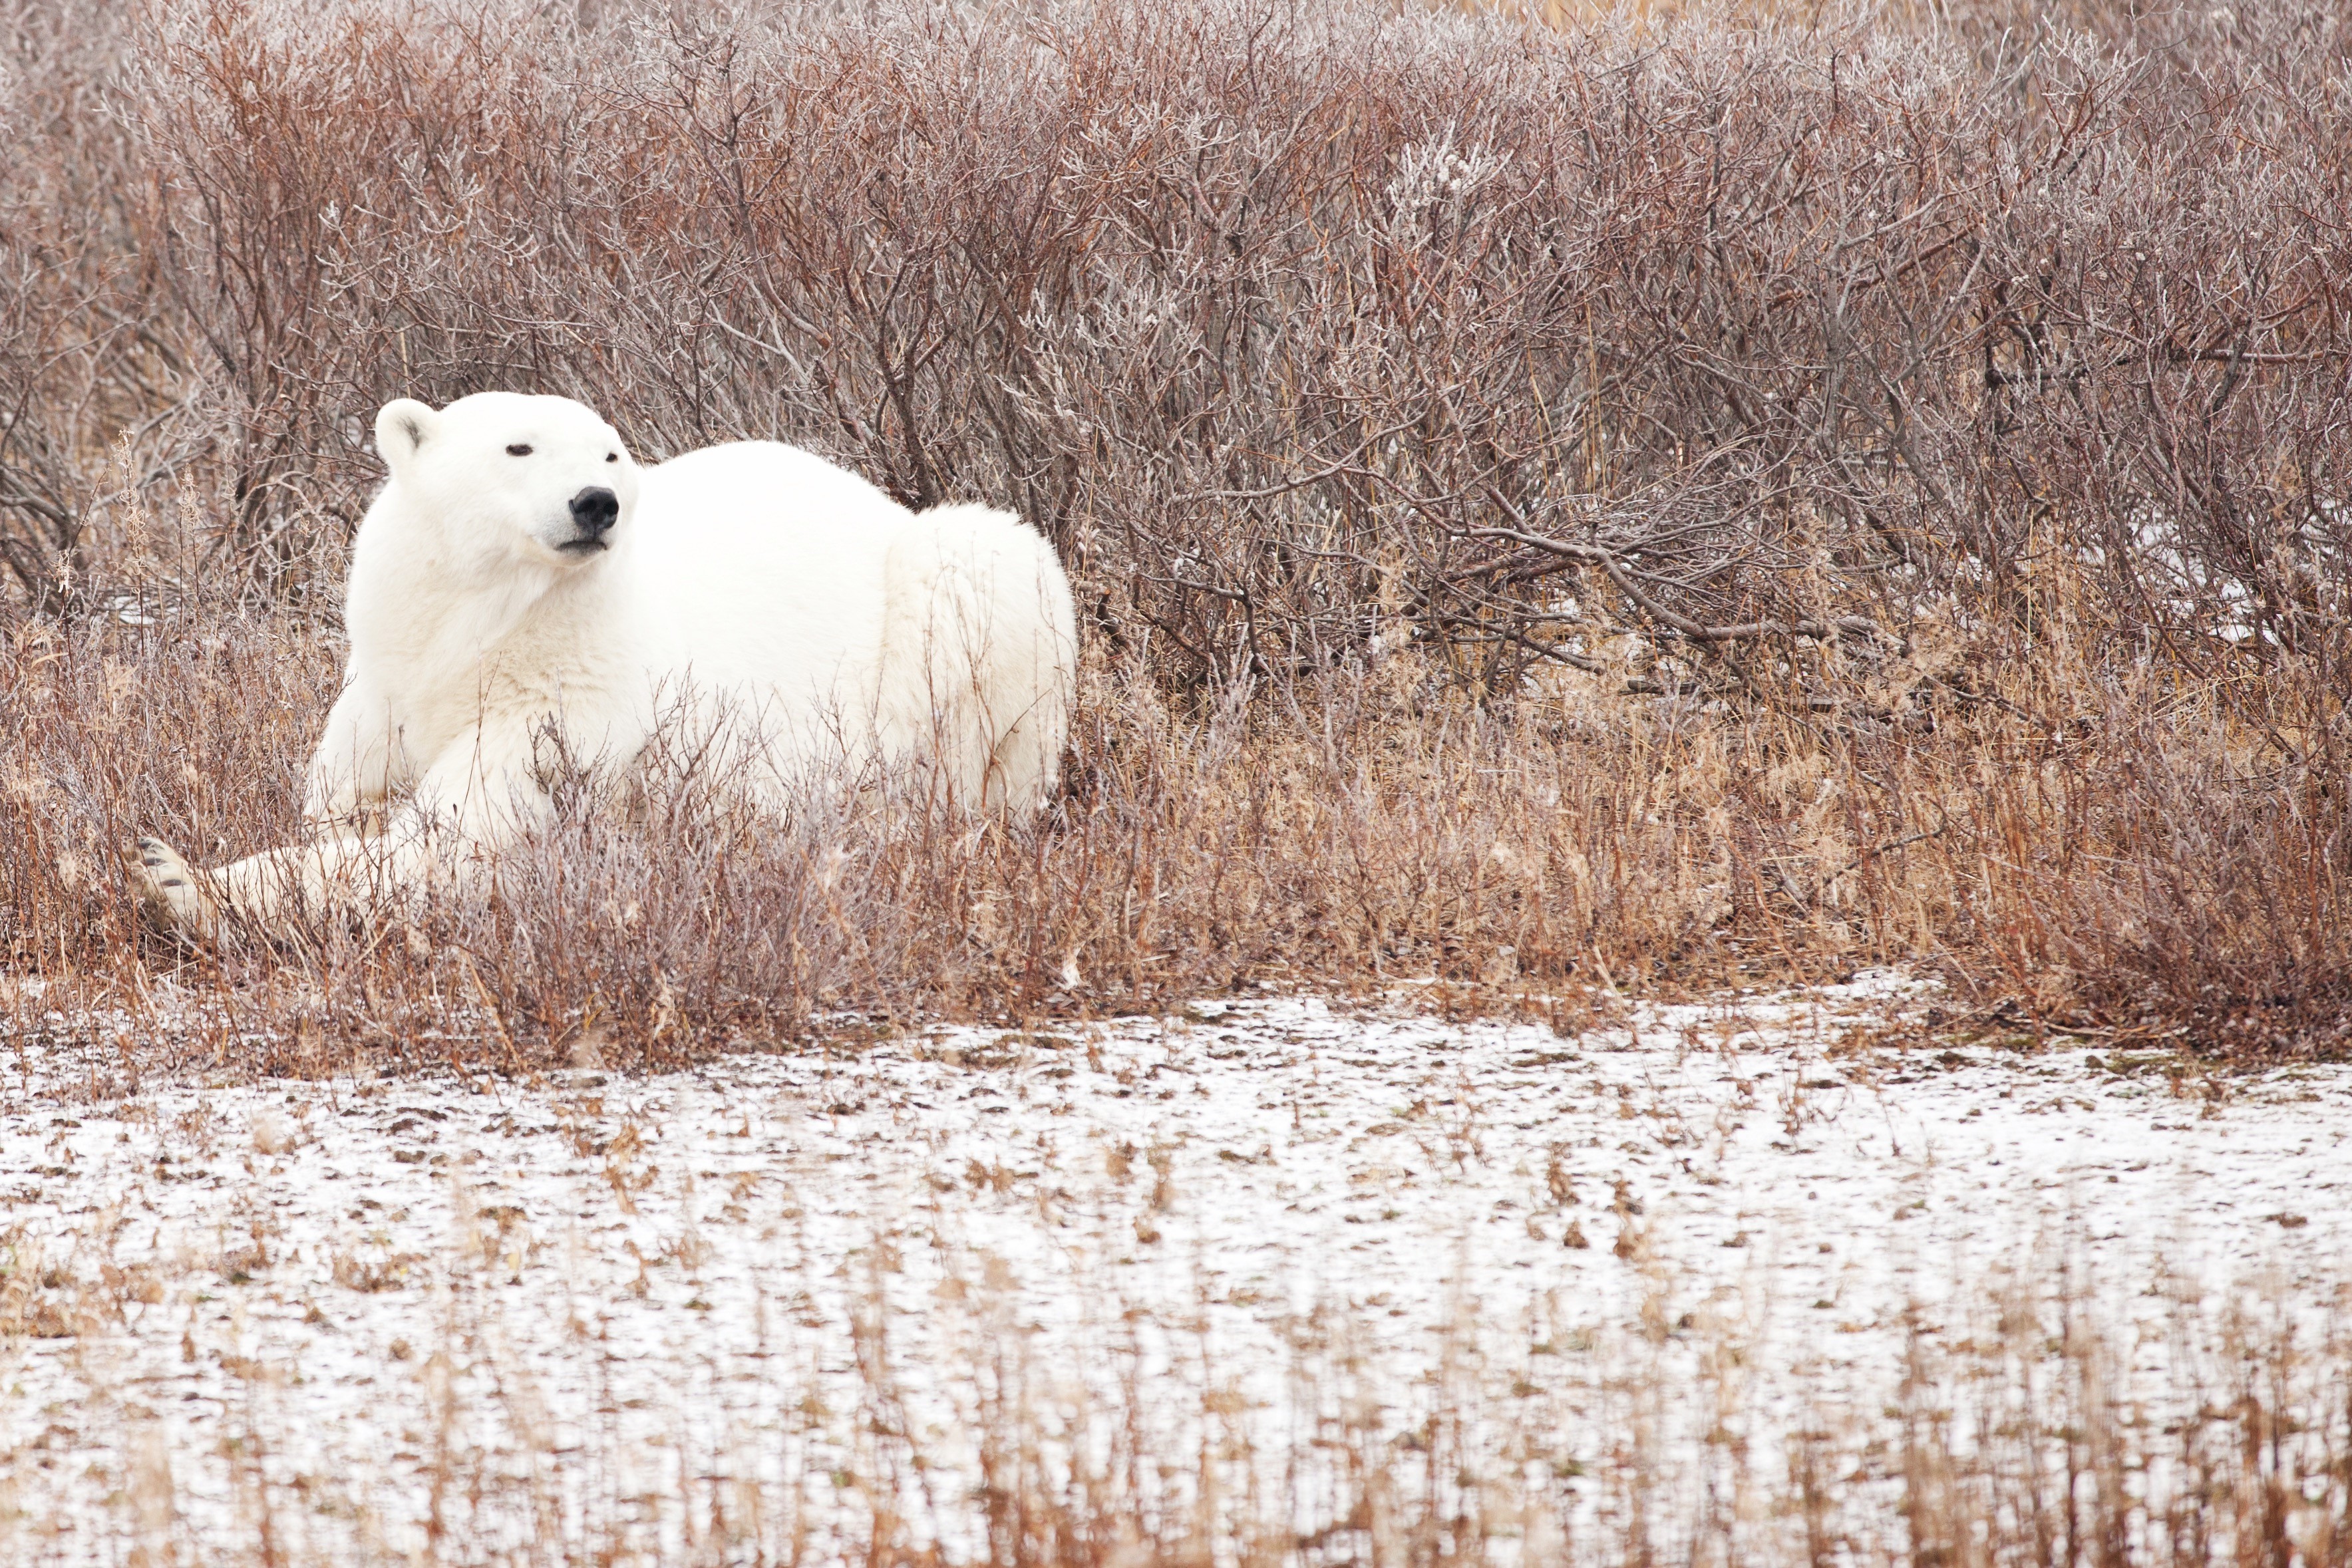 an adult polar bear rests in the grasses with a dusting of snow